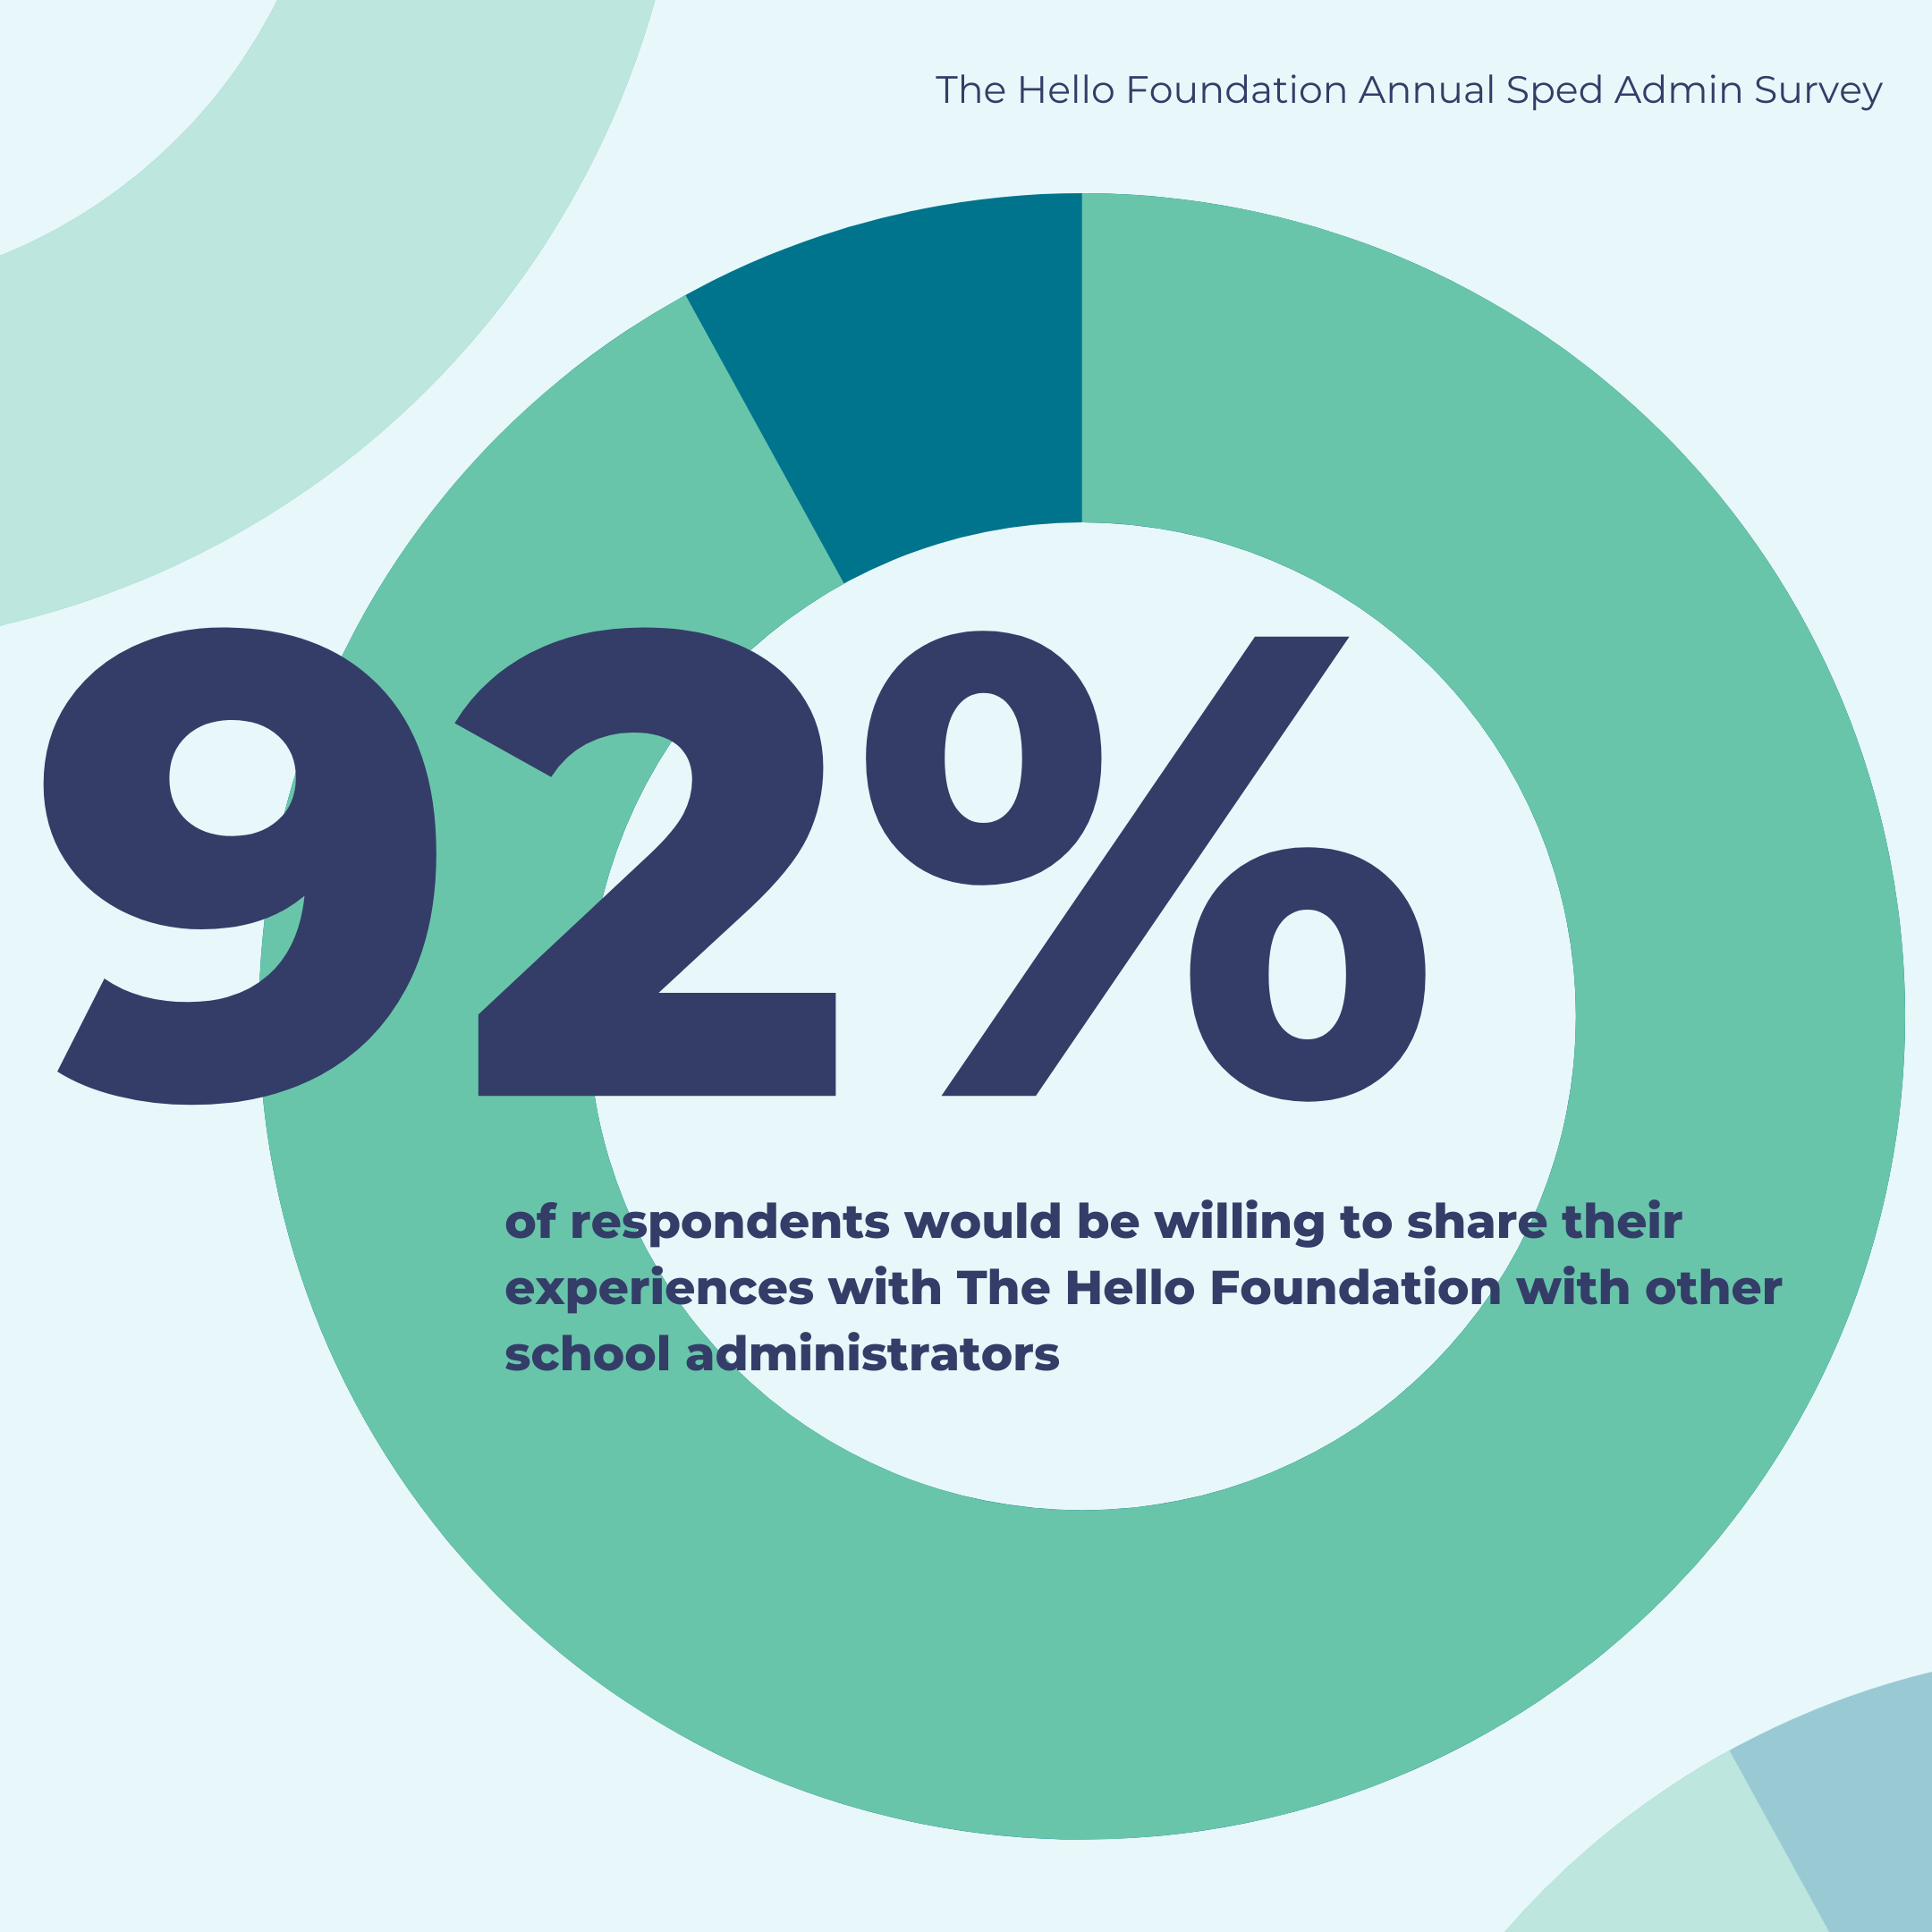 Donut chart with 92% positive; text overlay reads "92% of respondents rated would be willing to share their experiences with The Hello Foundation with other school administrators"